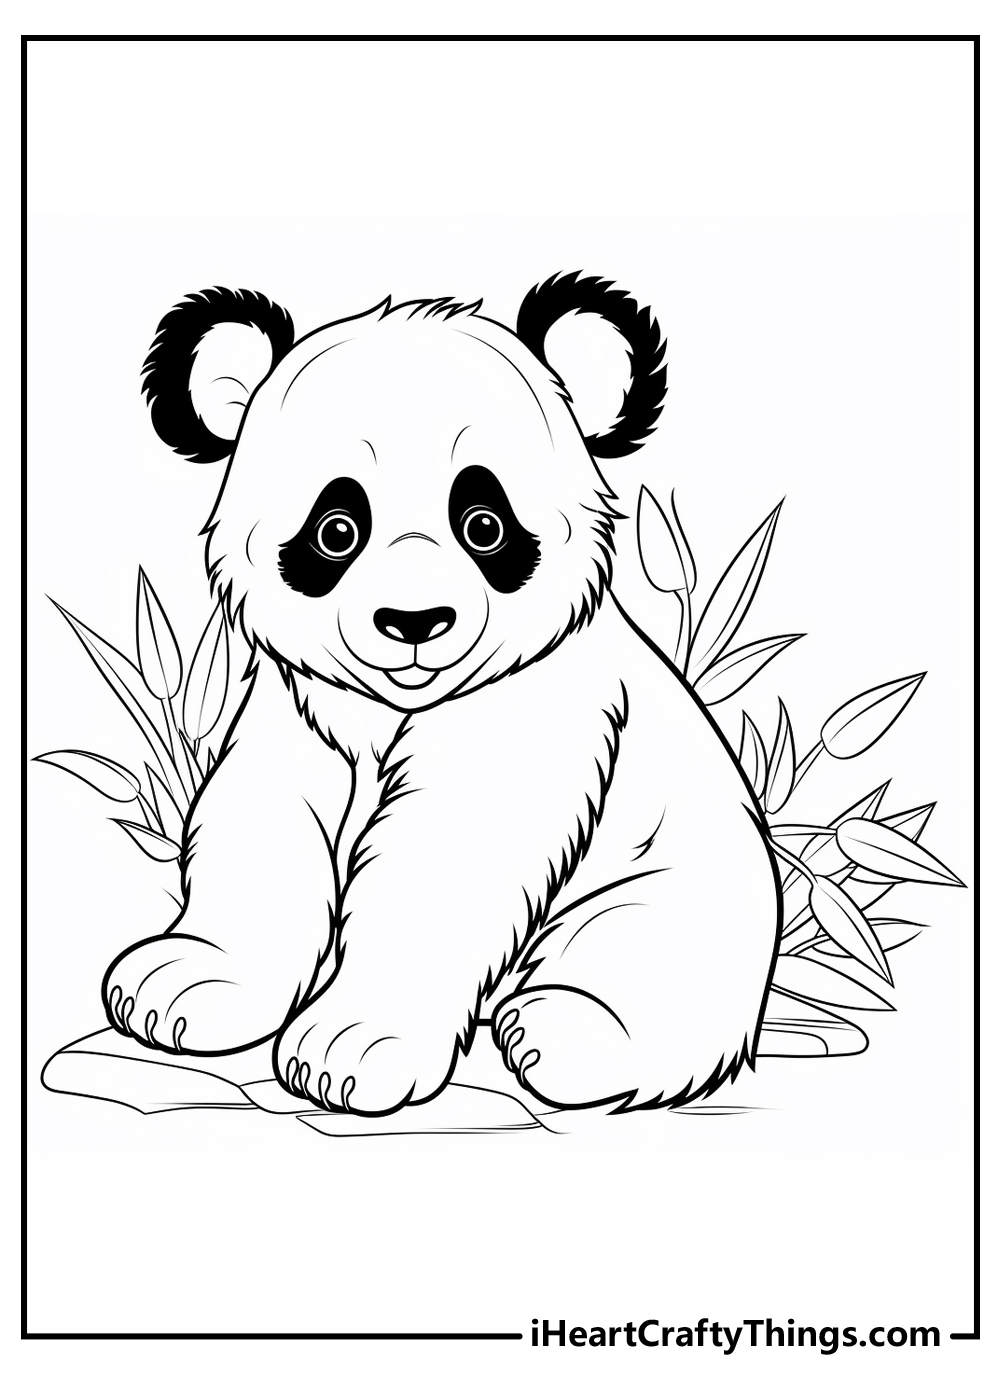 black-and-white giant panda coloring page